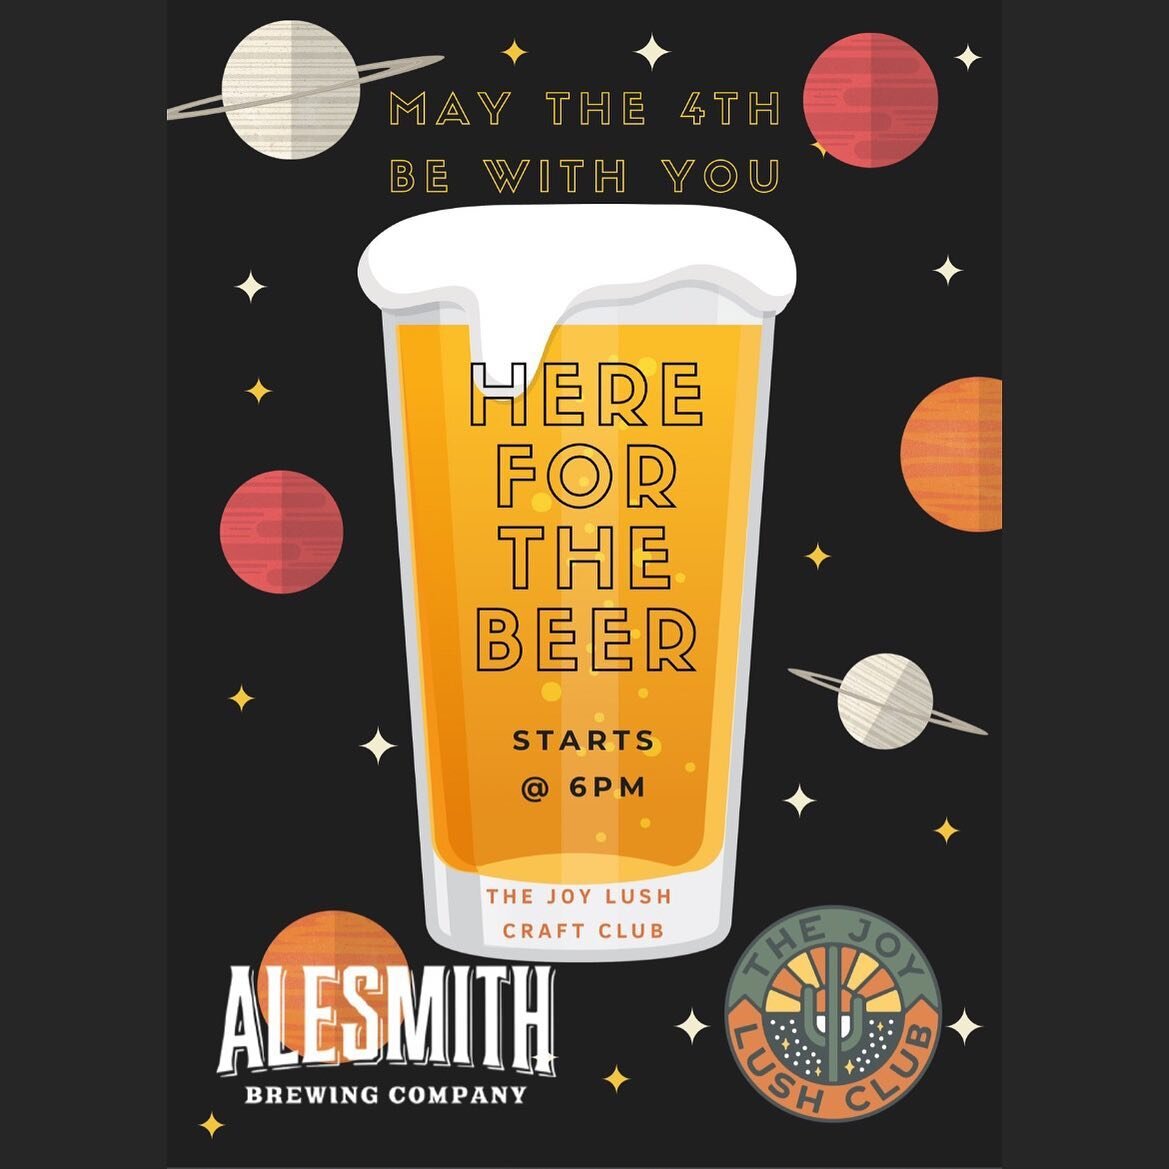 Stop by this Thursday for another &lsquo;Here for the Beer&rsquo; event! We&rsquo;re stoked to be highlighting one of our favorite SD breweries, @alesmithbrewing 🍺 Come celebrate May the 4th with us by wearing your favorite Star Wars gear for a chan